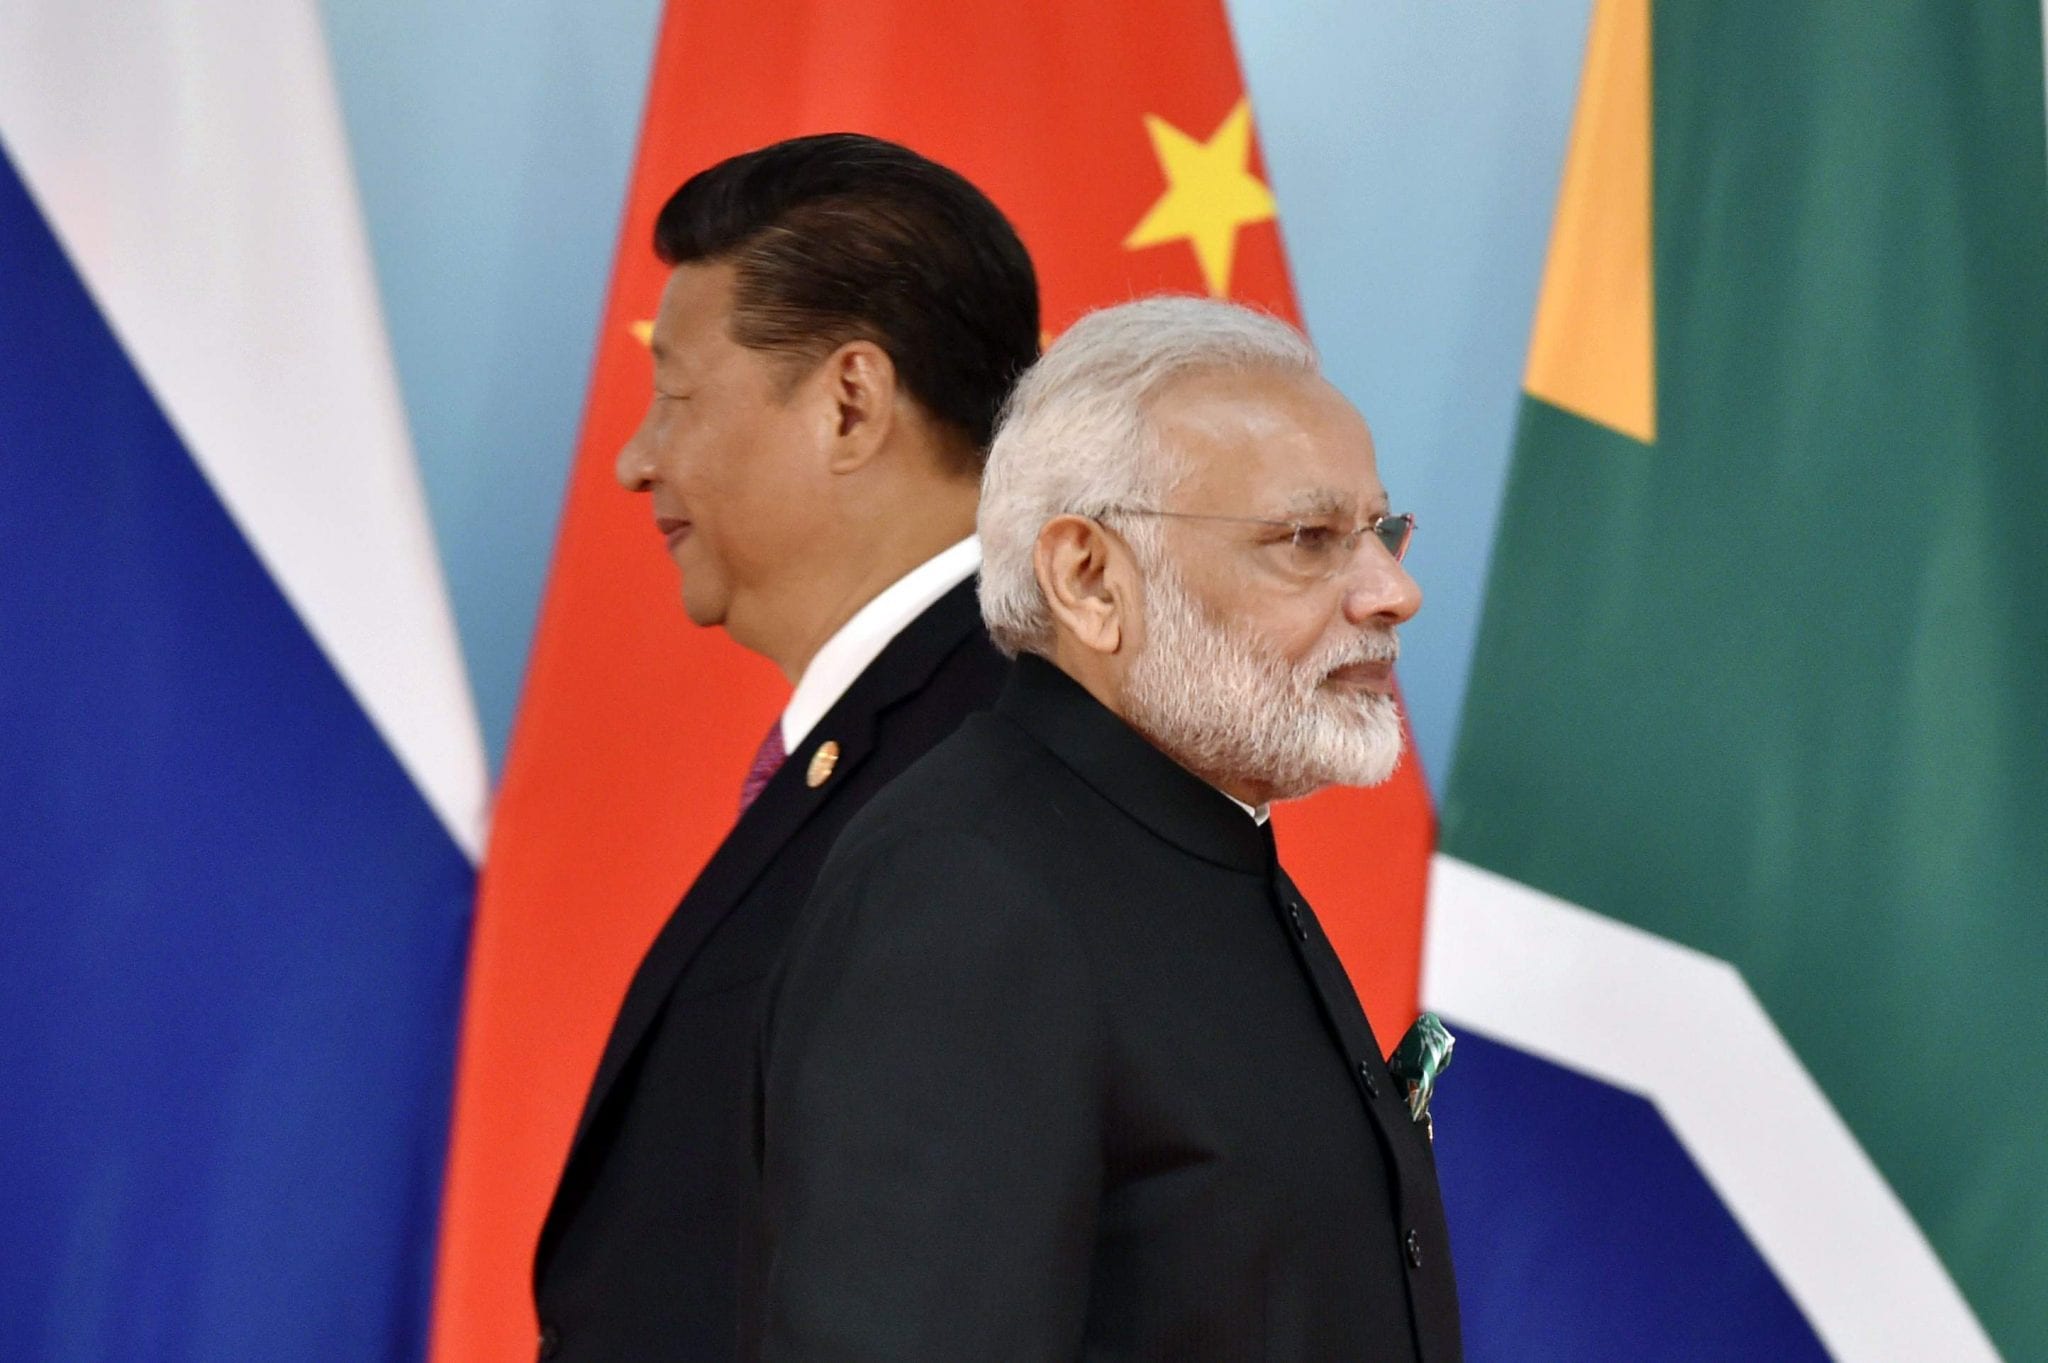 is india's ai-first policy coming a tad too late vis-a-vis developments in china & us?